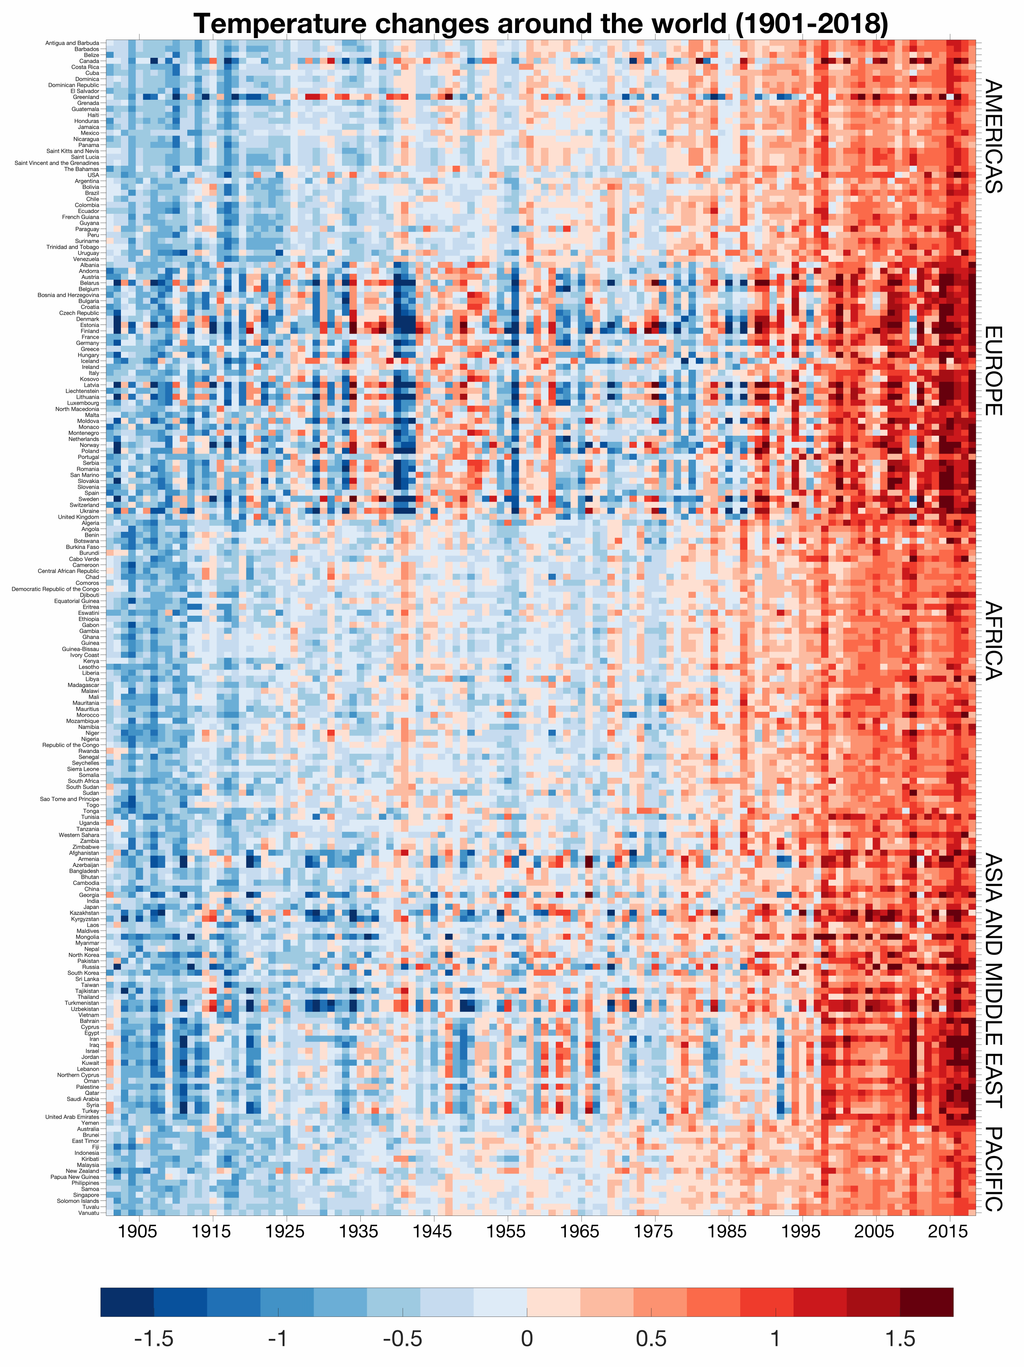 Stacked Warming Stripes showing annual mean temperatures for various countries (1901-2018), grouped by continent (by Ed Hawkins, climate scientist at University of Reading, CC BY-SA 4.0 via Wikimedia).